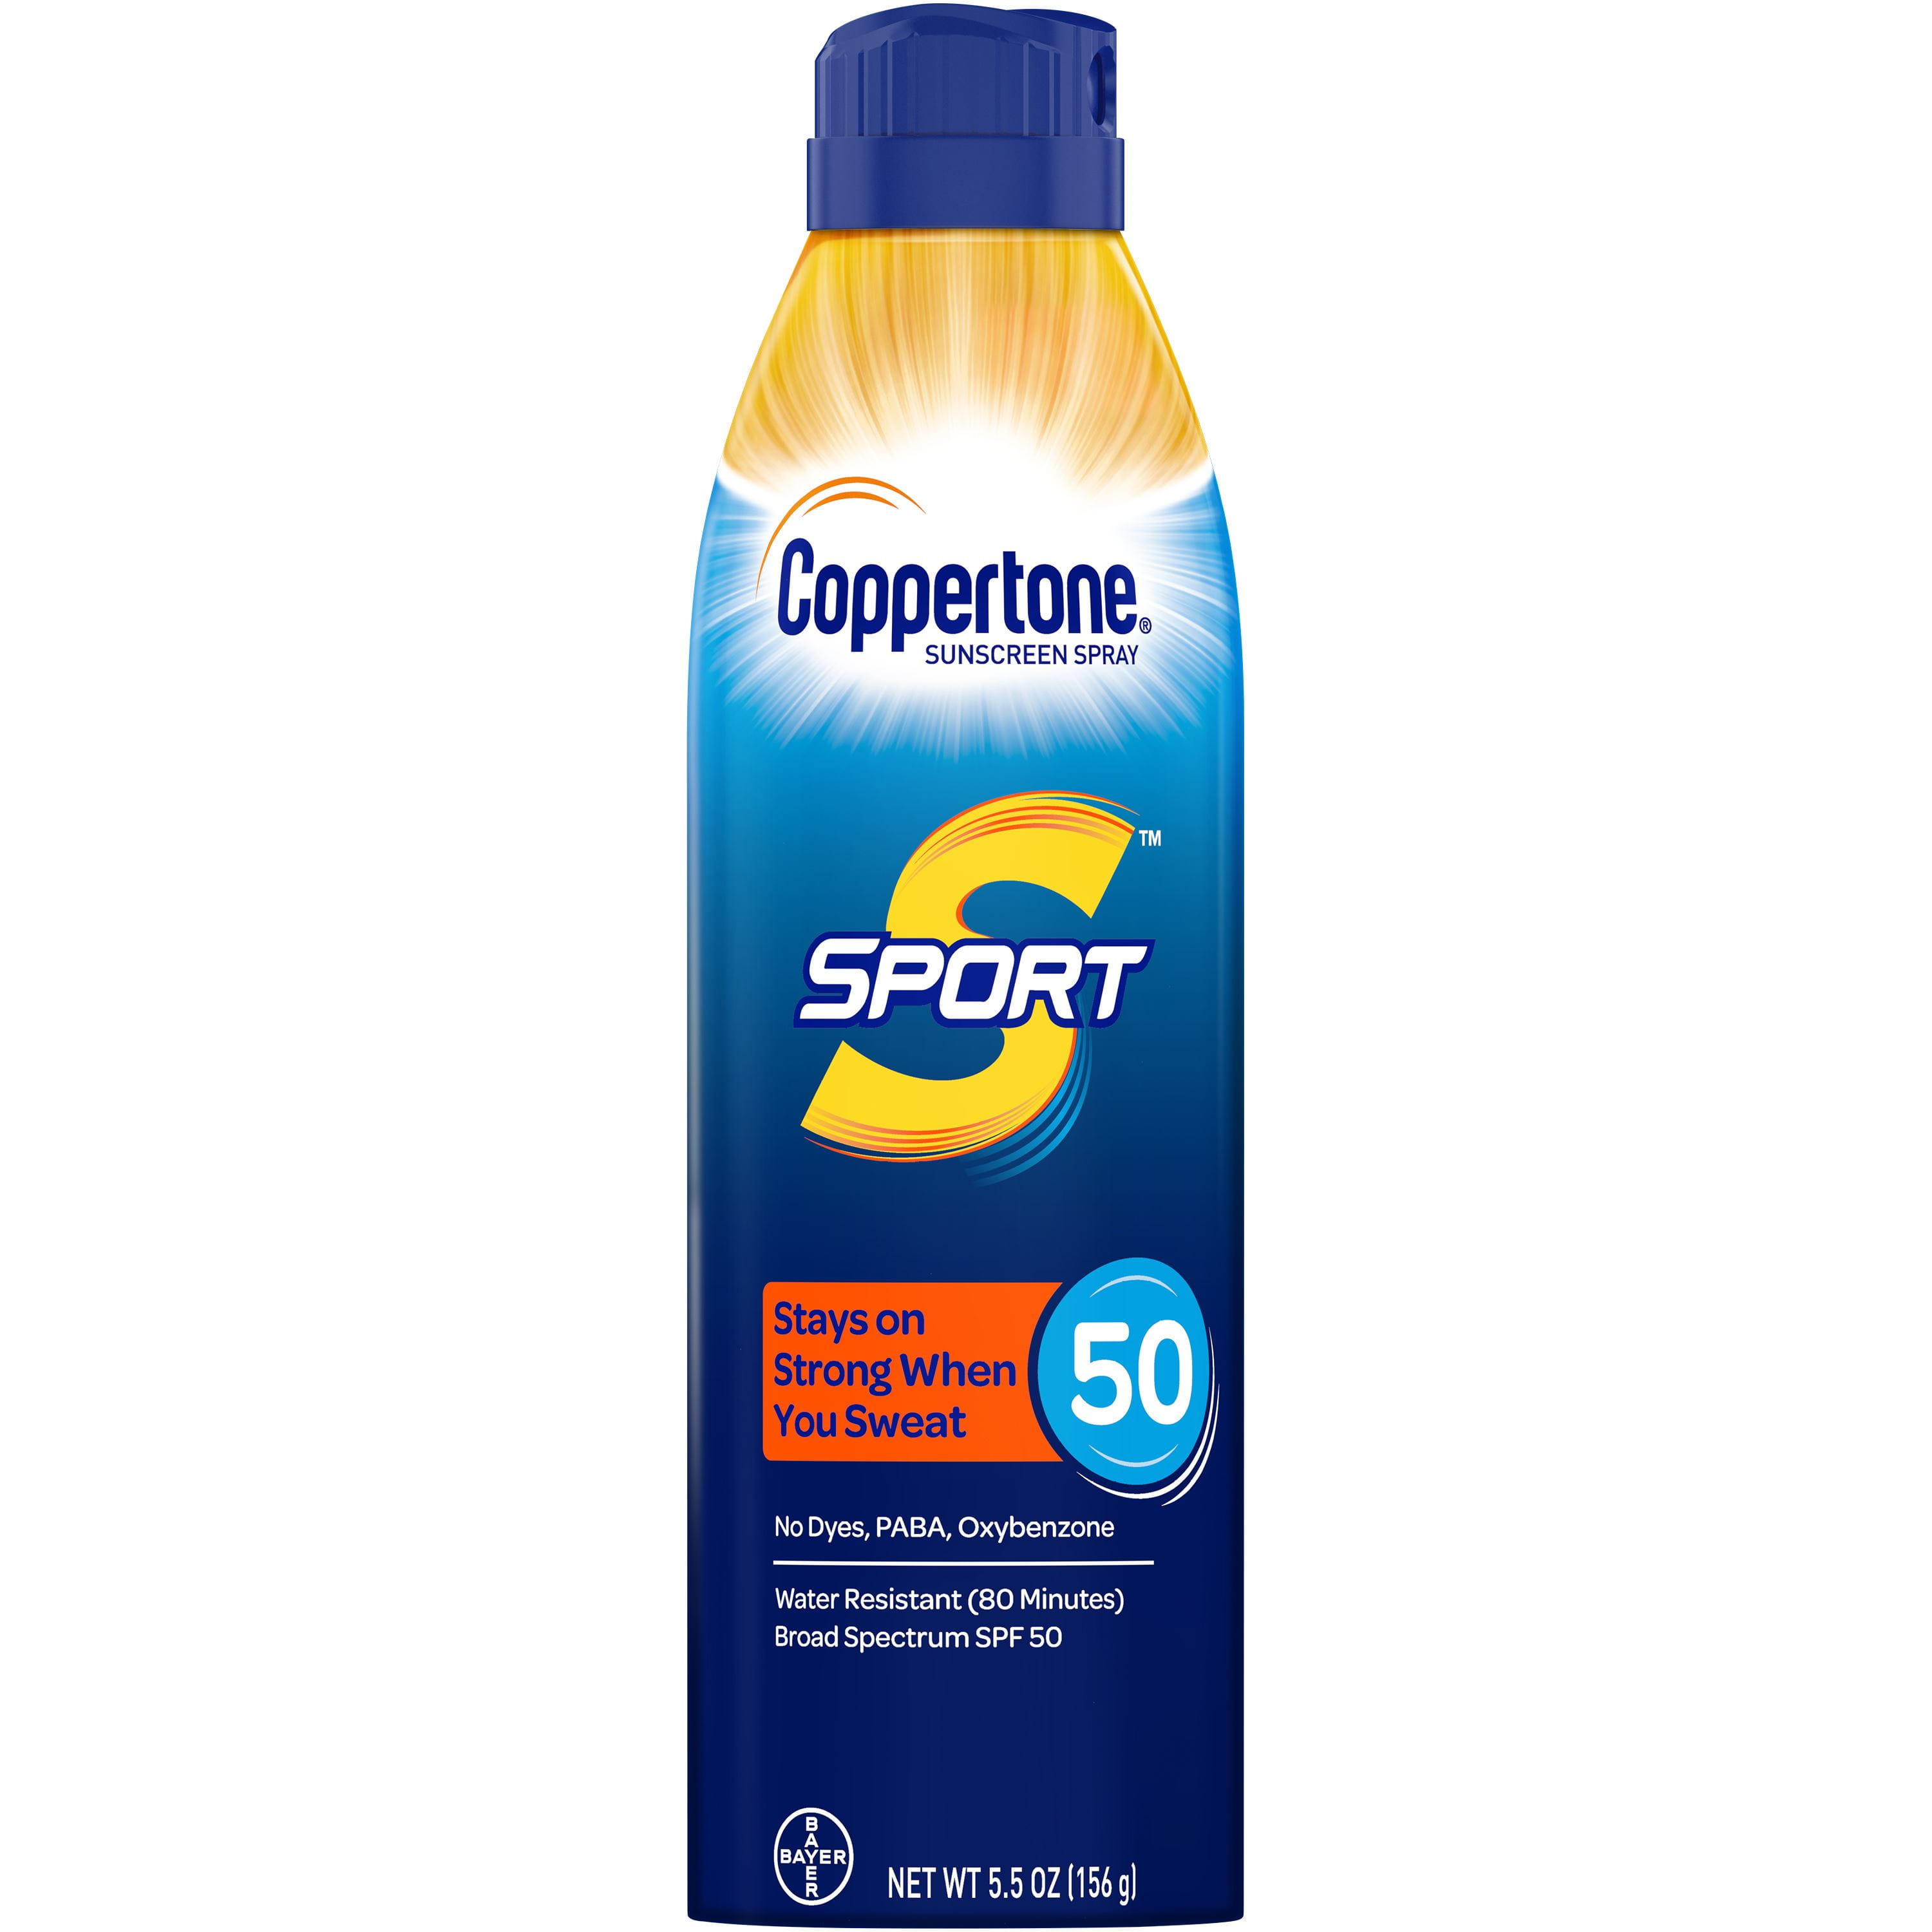 Expiration coppertone date code sport Does Sunscreen